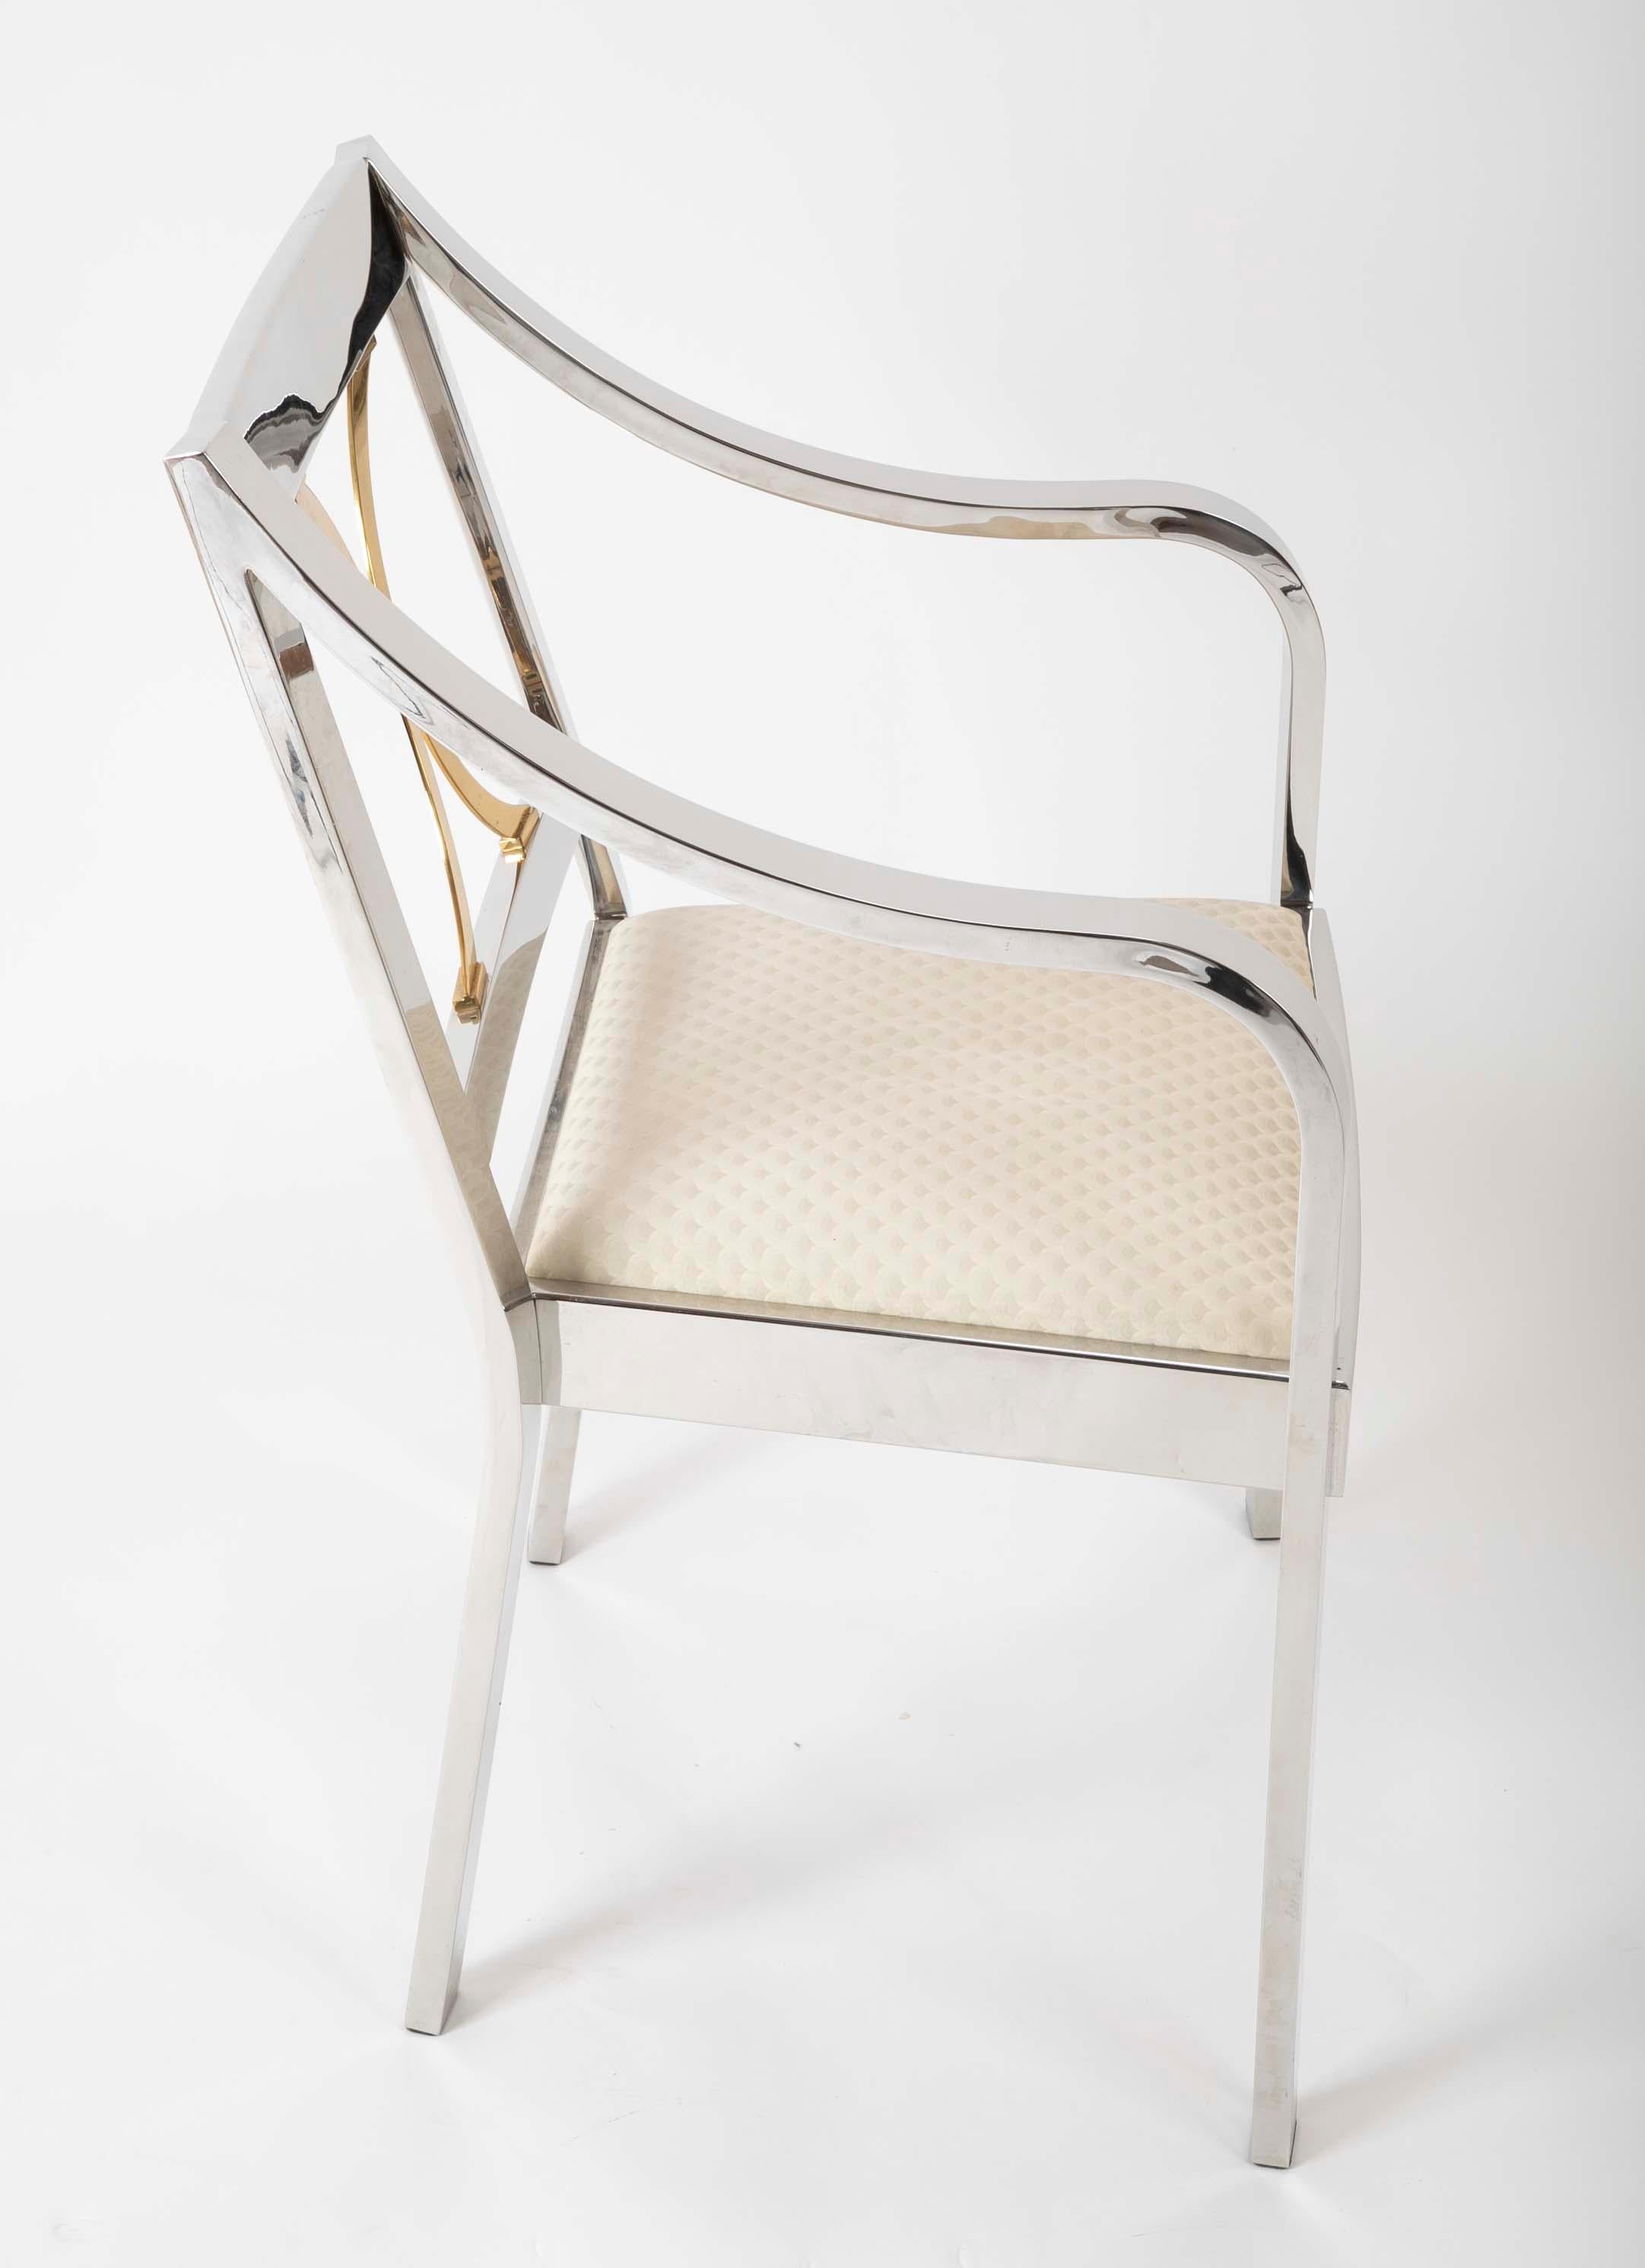 This elegant polished steel and brass Regency inspired armchair is of superb quality, made of highly polished steel and bass with an upholstered cushion by Karl Springer Ltd.